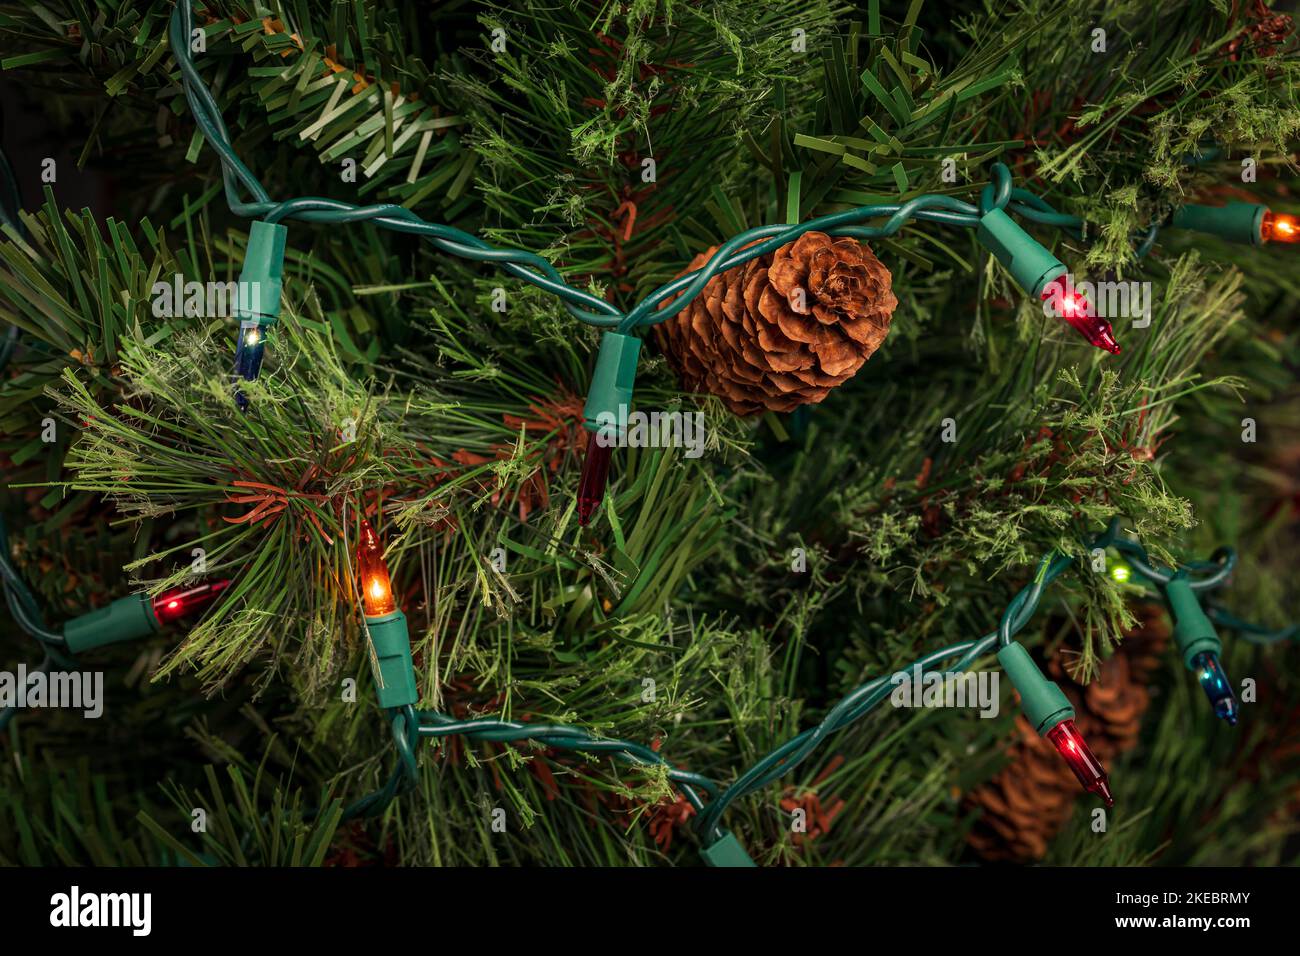 Christmas string lights with bad bulb on Xmas tree. Holiday lighting repair, safety and decoration concept. Stock Photo